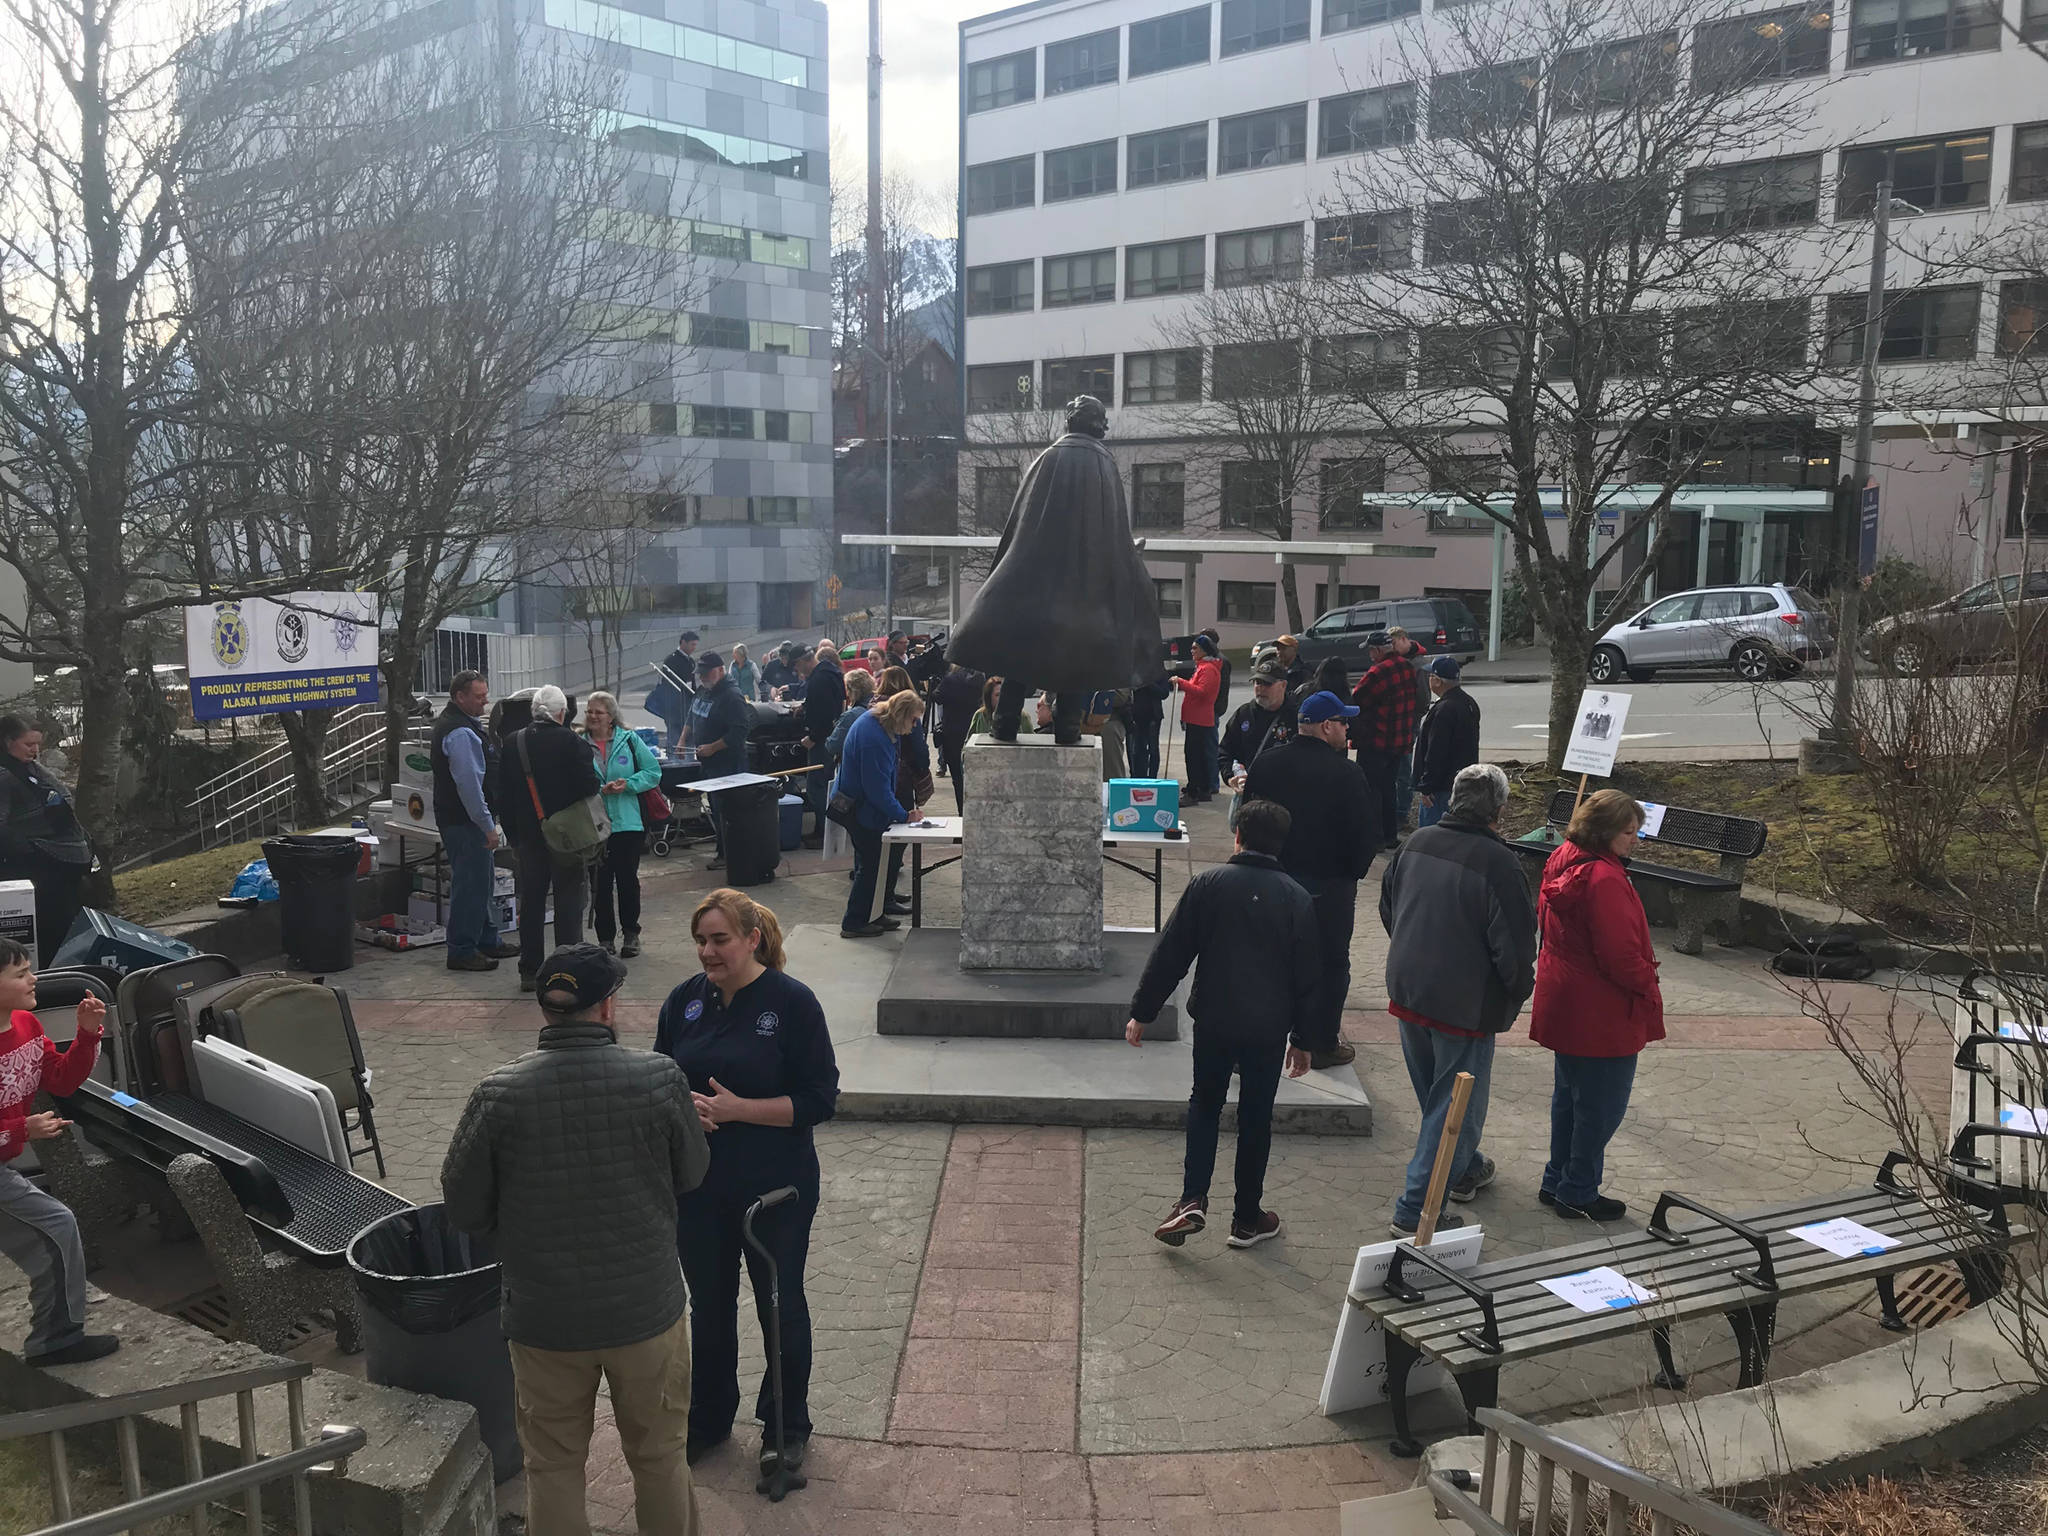 The scene in front of the Capitol on Wednesday, March 20, 2019 for the Alaska Public Employees Association’s Save the Alaska Marine Highway System rally. (Mollie Barnes | Juneau Empire)